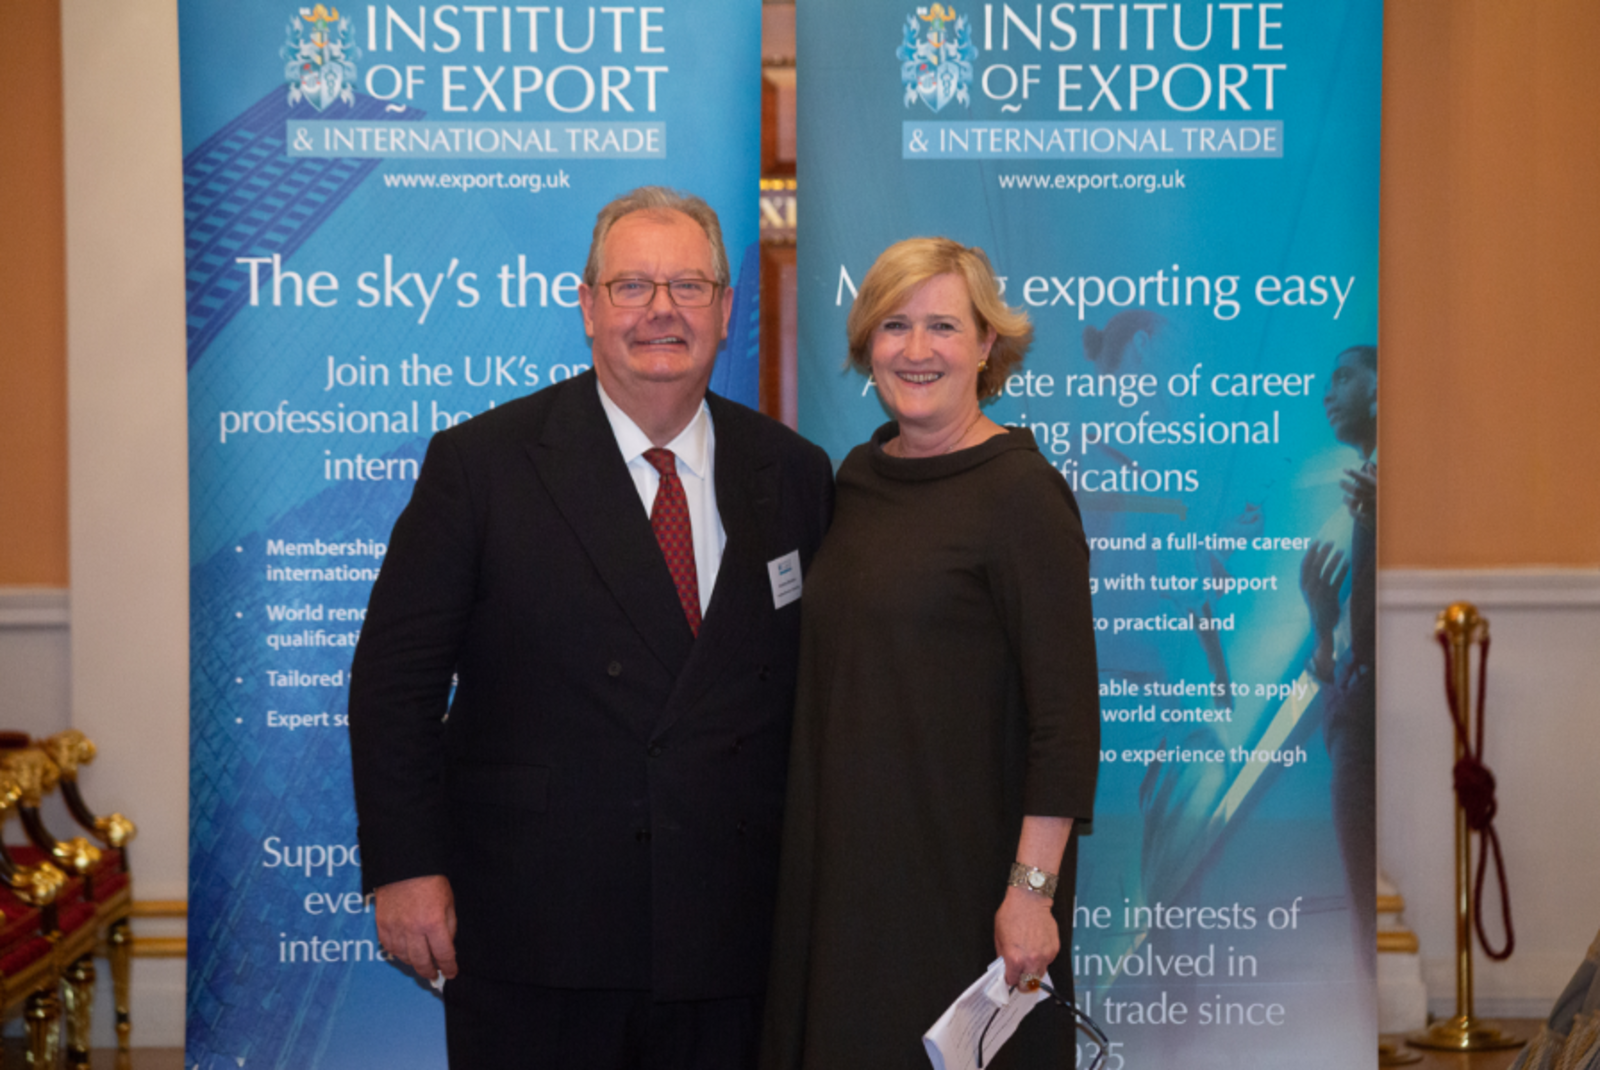 Institute of Export Awards with Director General Lesley Batchelor OBE